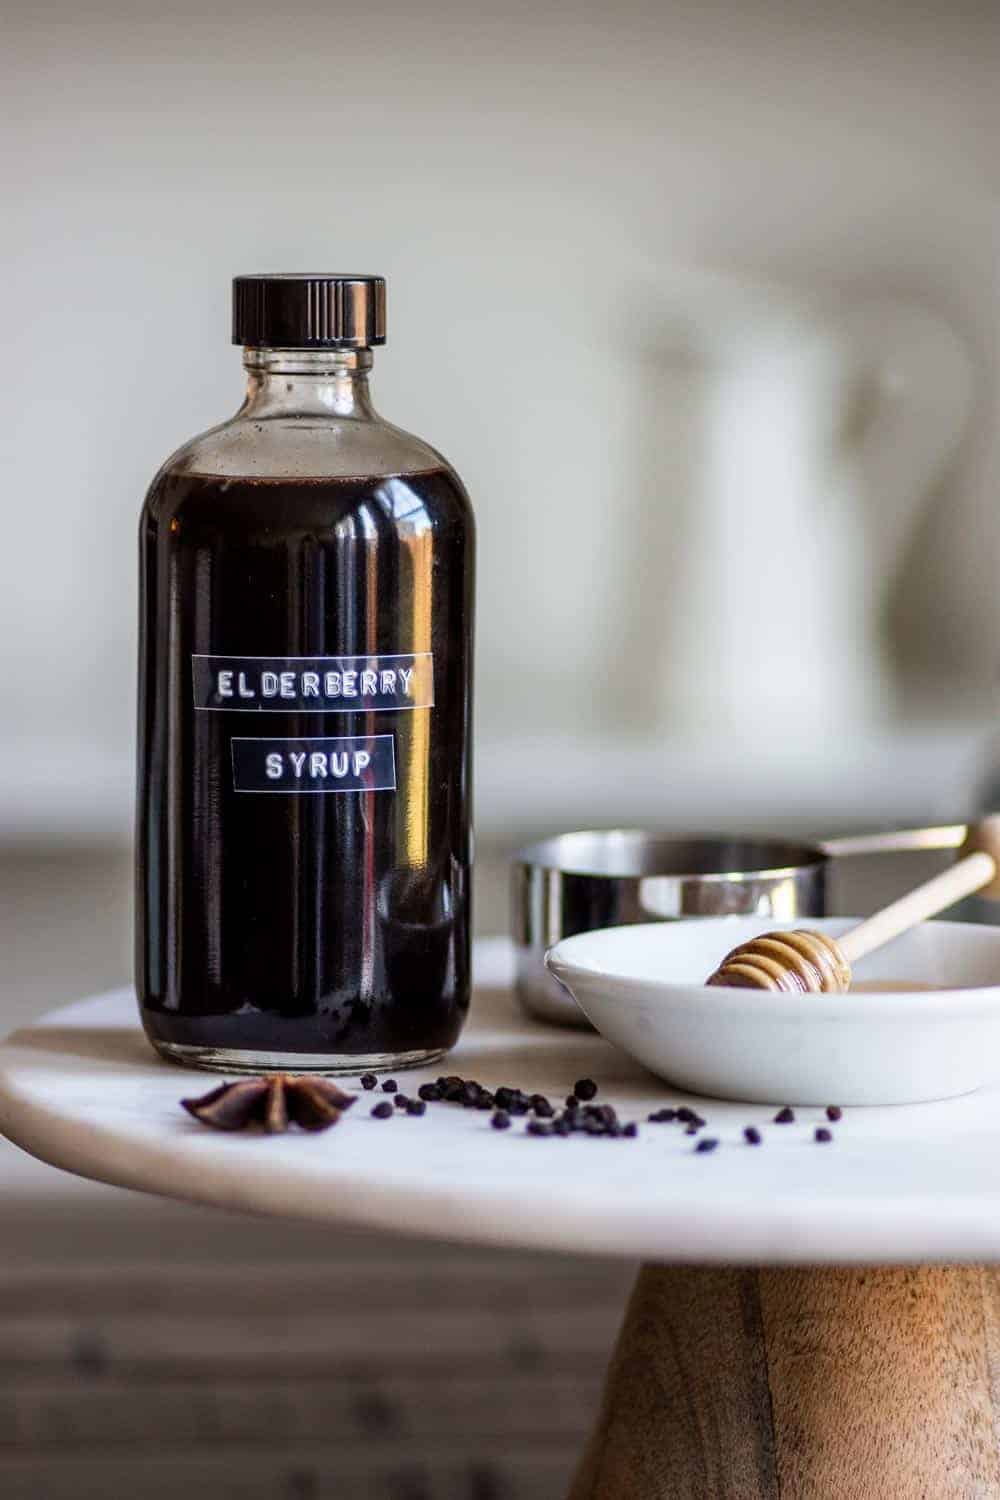 An easy Elderberry Syrup Recipe made with dried elderberries, echinacea, herbs, and honey. Great for colds and supporting the immune system when used medicinally, or used as a syrup for drinks or mixed in with maple syrup as a topping for food. || The Butter Half #elderberry #elderberrysyrup #naturalremedies #herbalremedies #holisticremedies #thebutterhalf